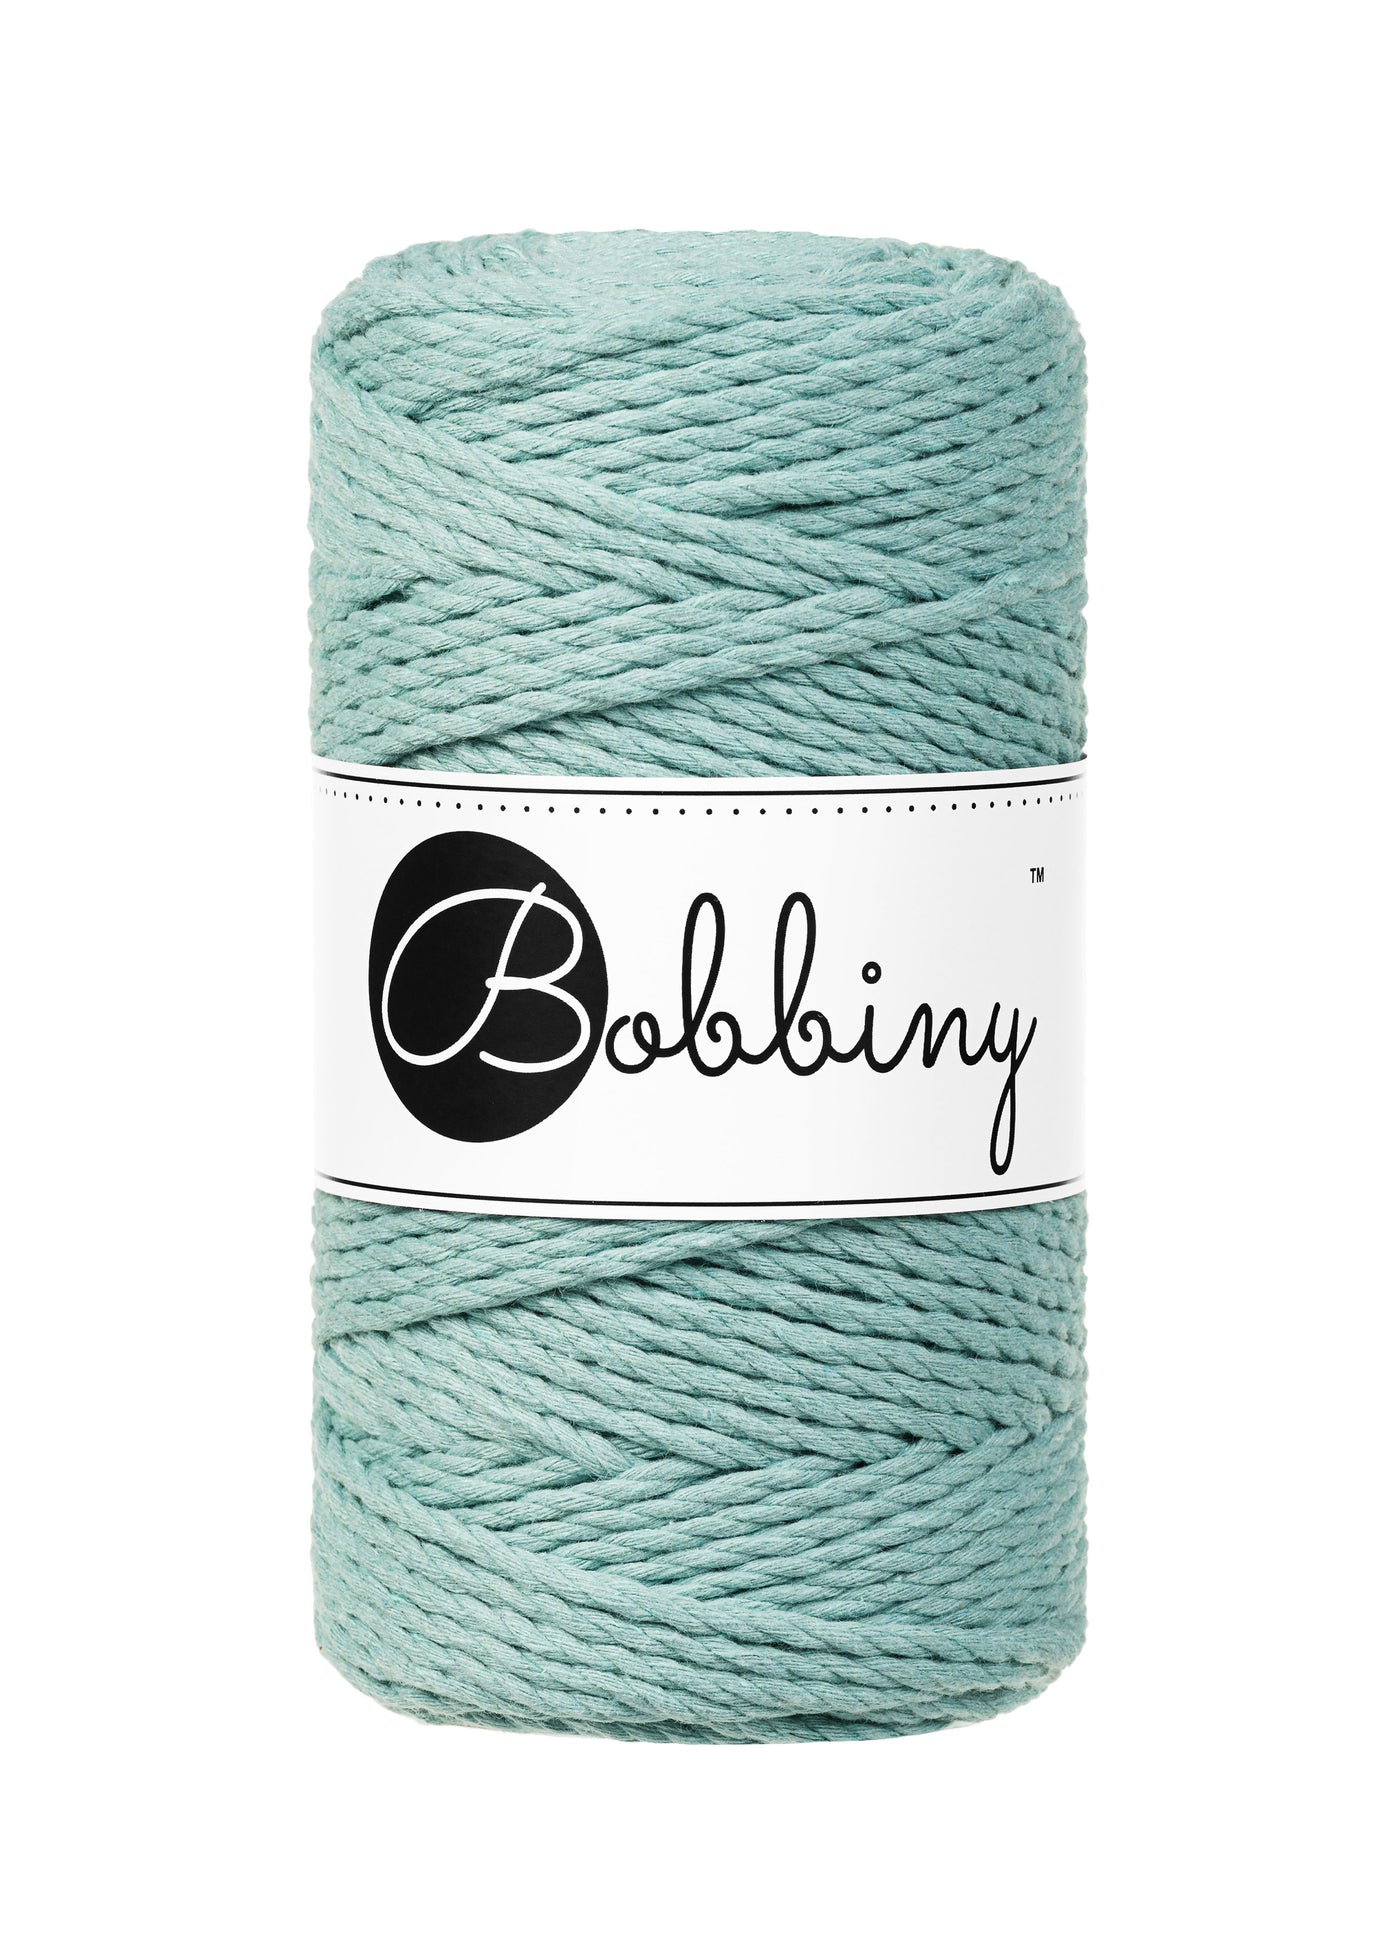 Bobbiny 3ply 3mm rope in duck egg blue shade 